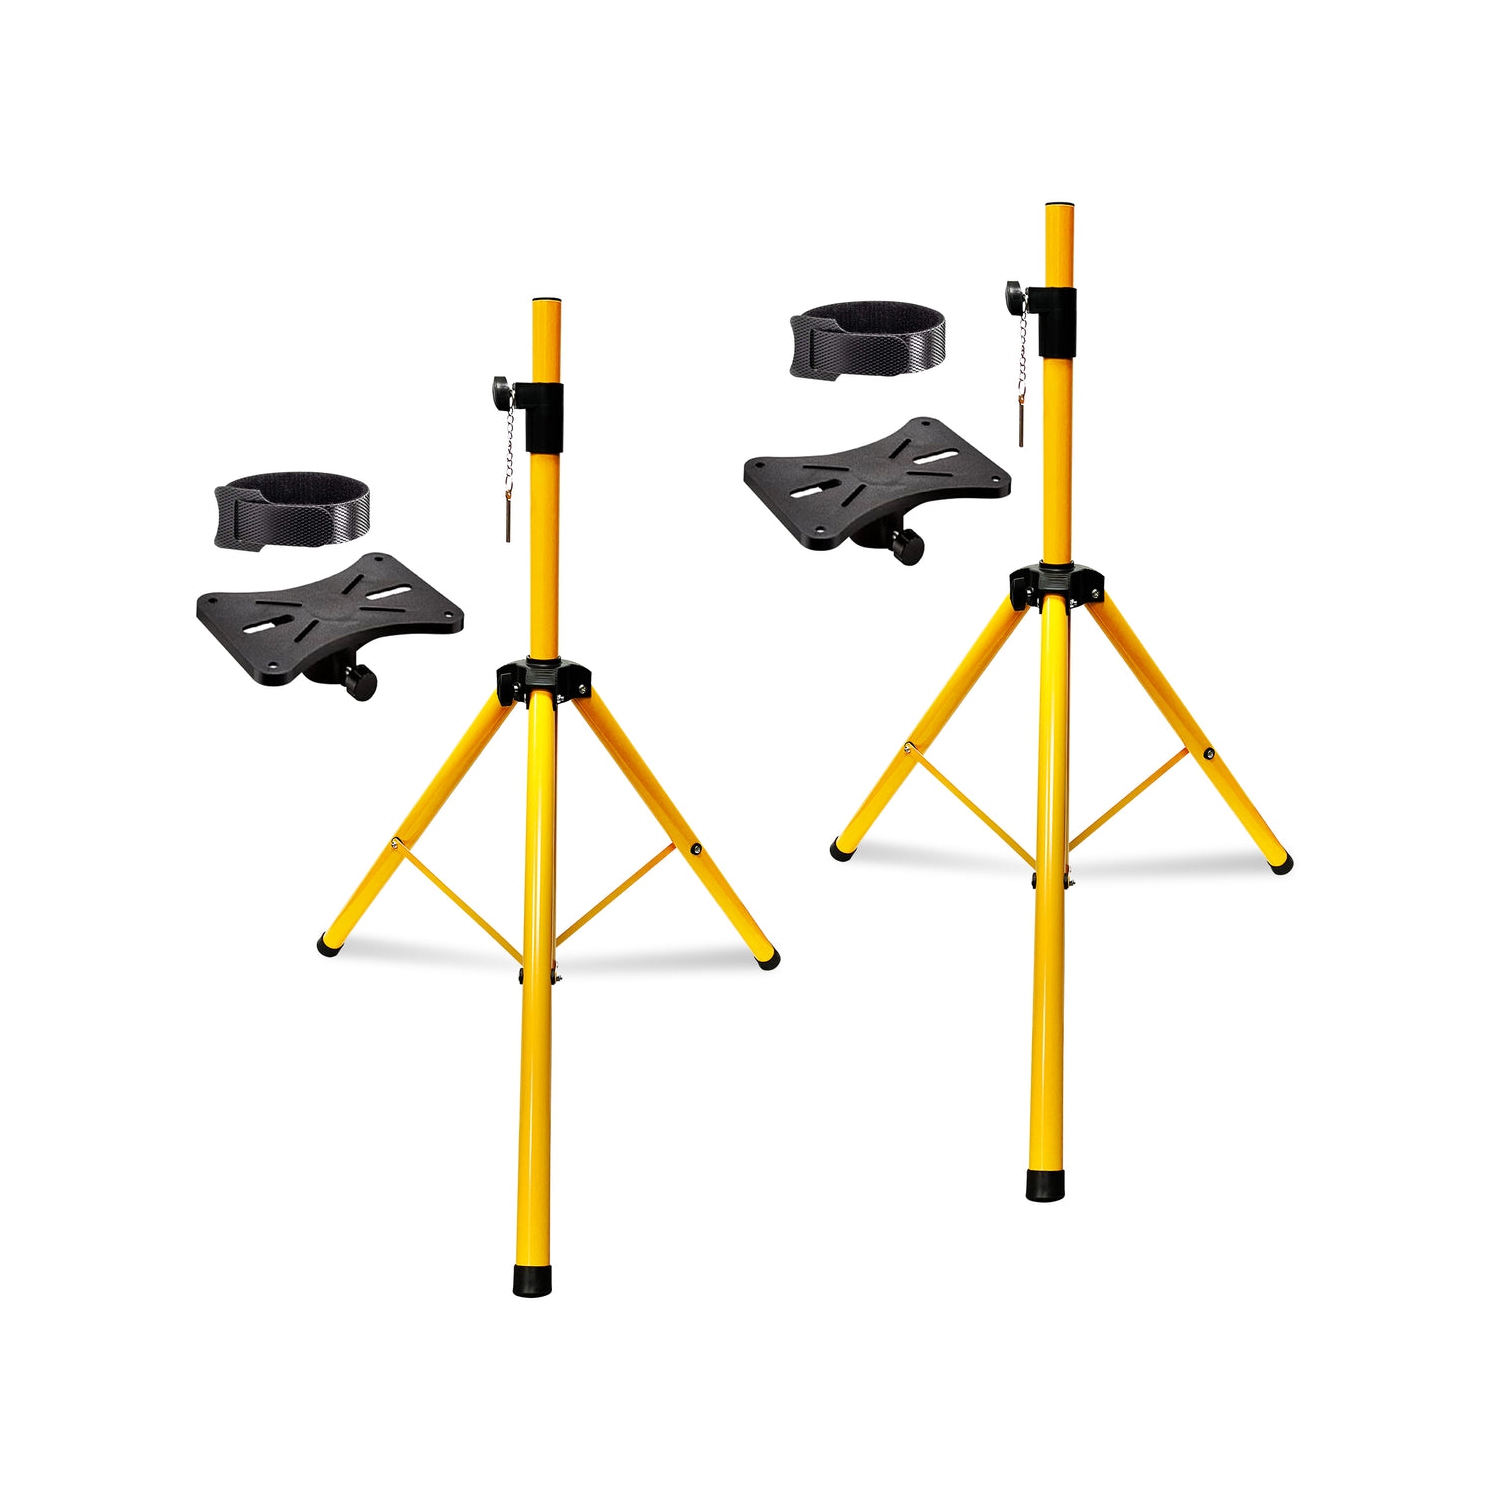 5 Core Speakers Stands 1 Piece Yellow Height Adjustable Tripod PA Monitor Holder for Large Speakers DJ Stand Para Bocinas - SS ECO 2PK YLW WoB